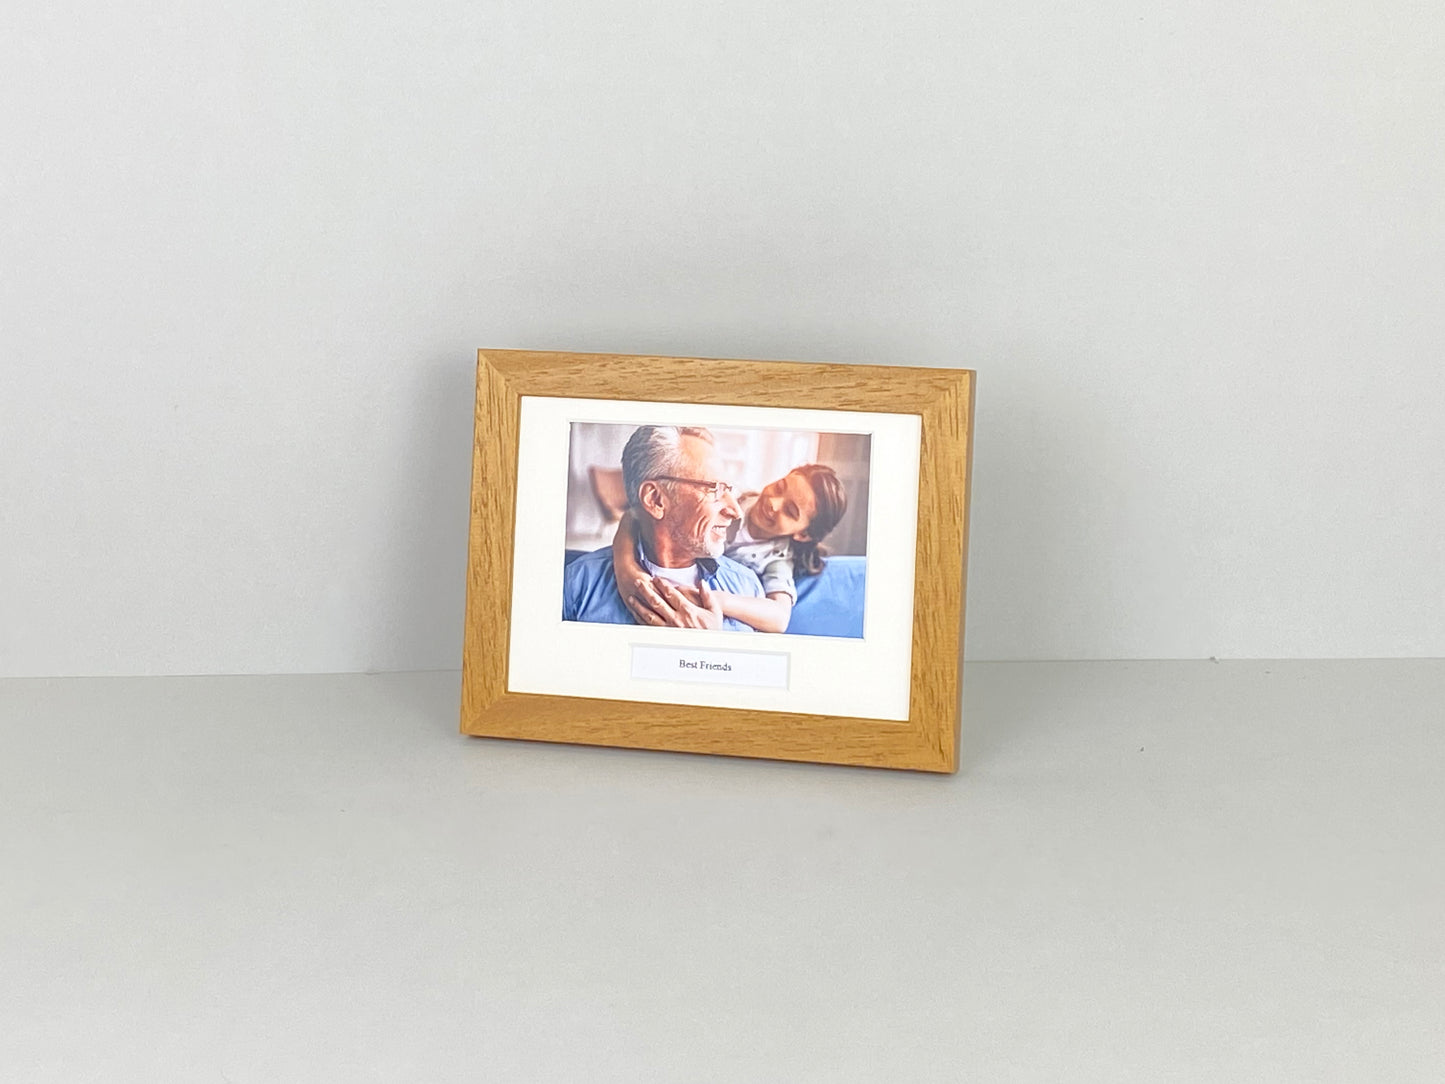 Personalised Mini Caption Frames. Landscape 8x6" Frame with 6x4" Photo.  Handmade by Art@Home in the UK